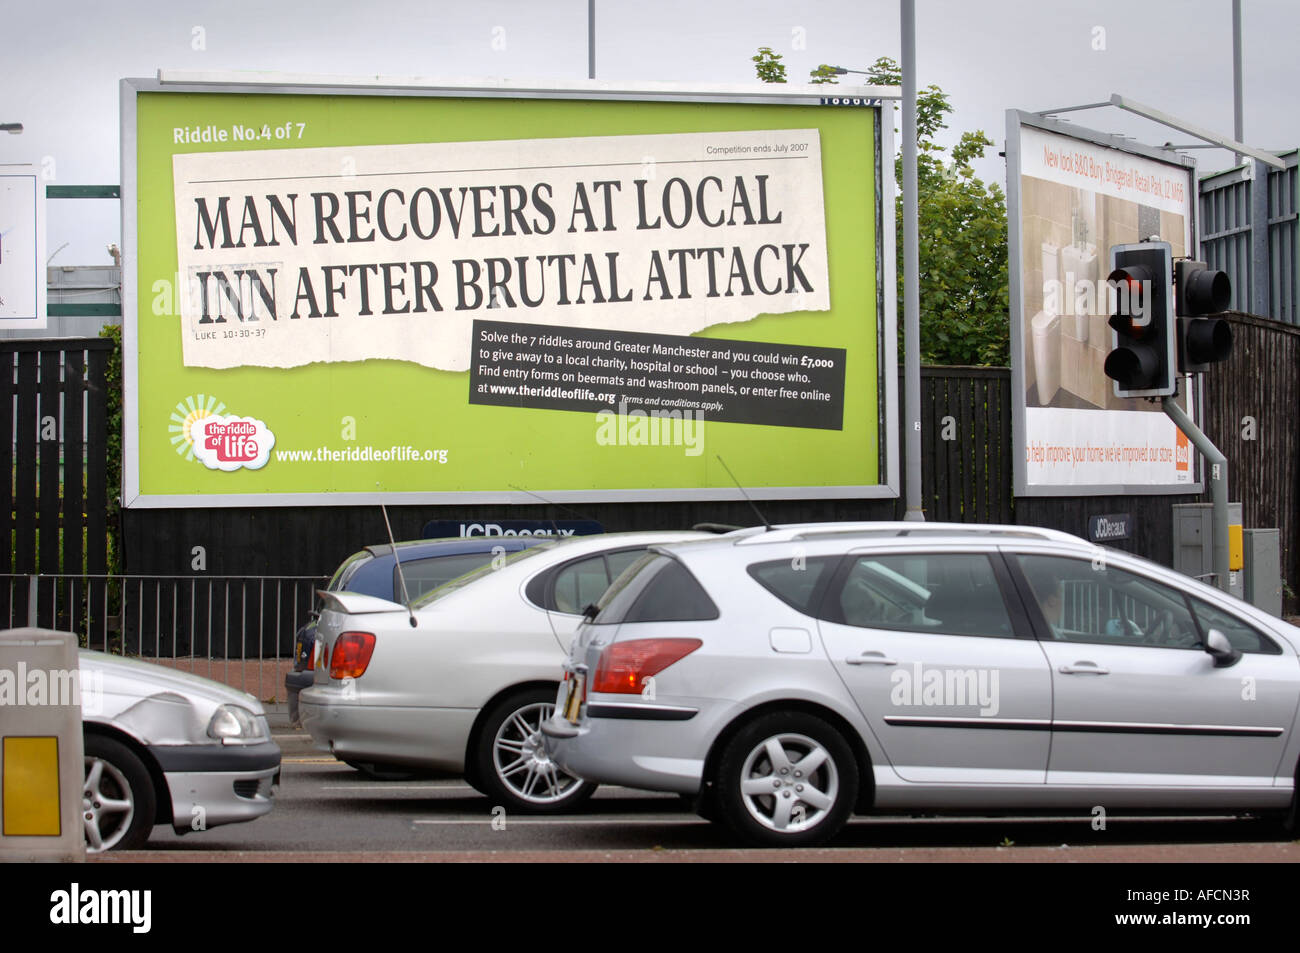 A BILLBOARD WITH A CRYPTIC RELIGOUS MESSAGE FROM THE BIBLE IN BURY UK Stock Photo